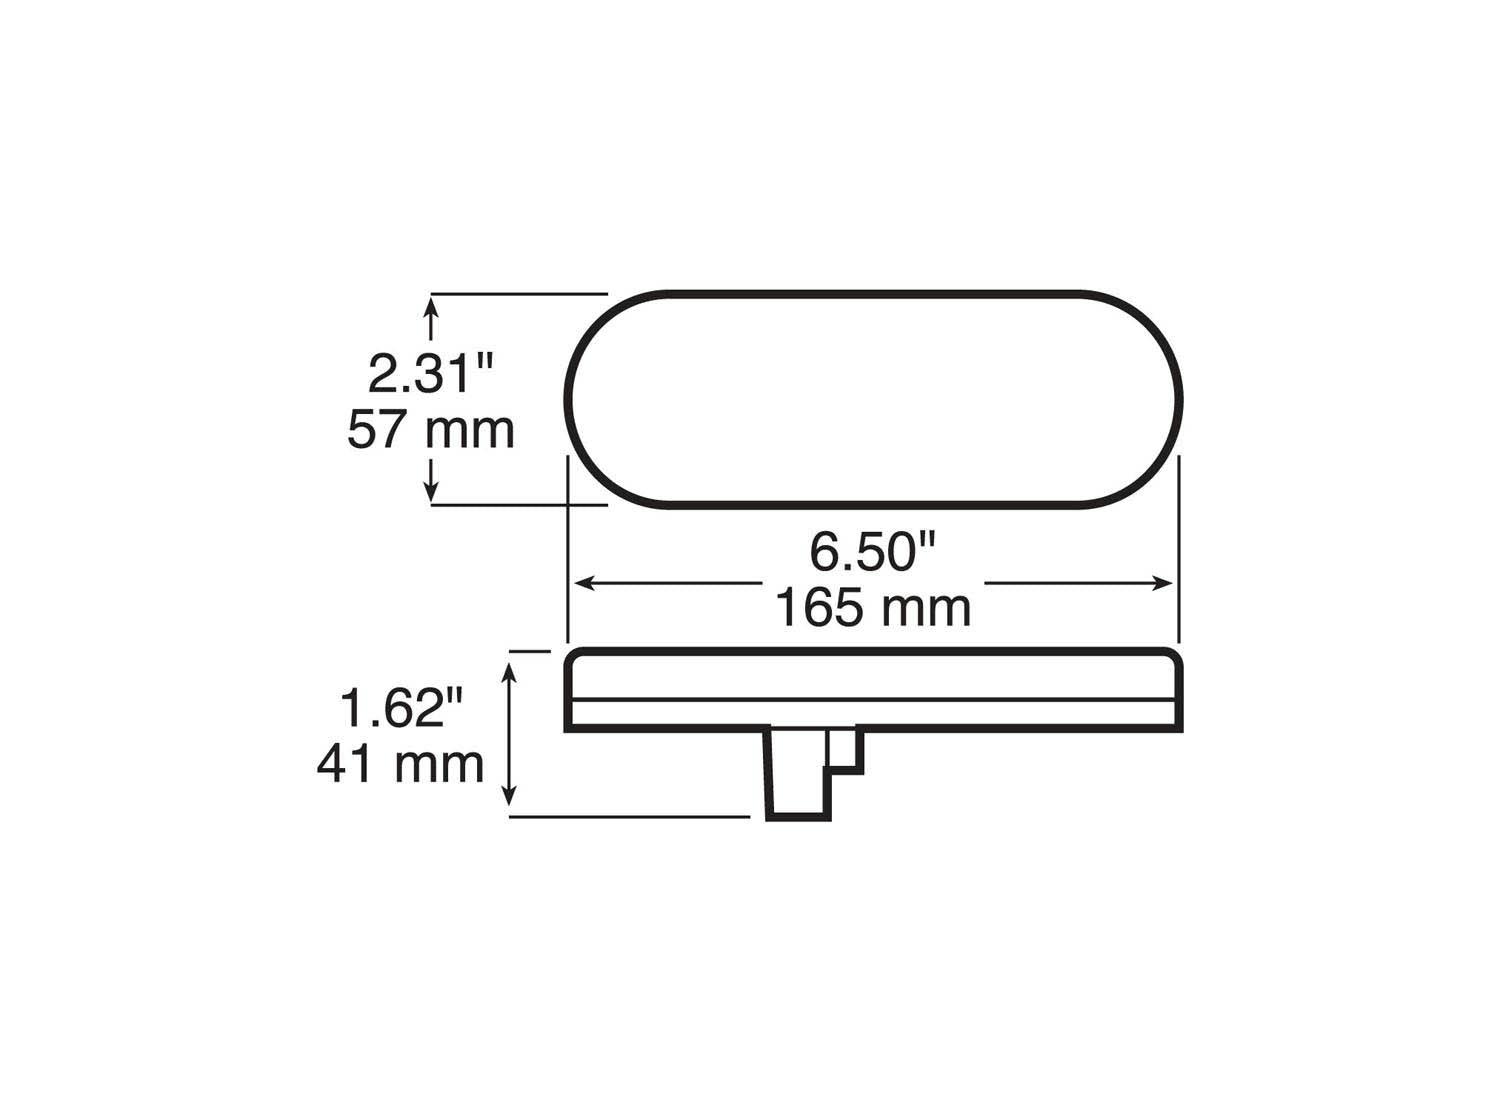 LED Stop/Turn/Tail, Oval, PL3 Housing Grommet-Mount 6.5"X2.25" Multi-volt, red (Pack of 6) - 821_line_dual_2view-BX5_eb024201-91ee-4049-b552-47e0cdda618e